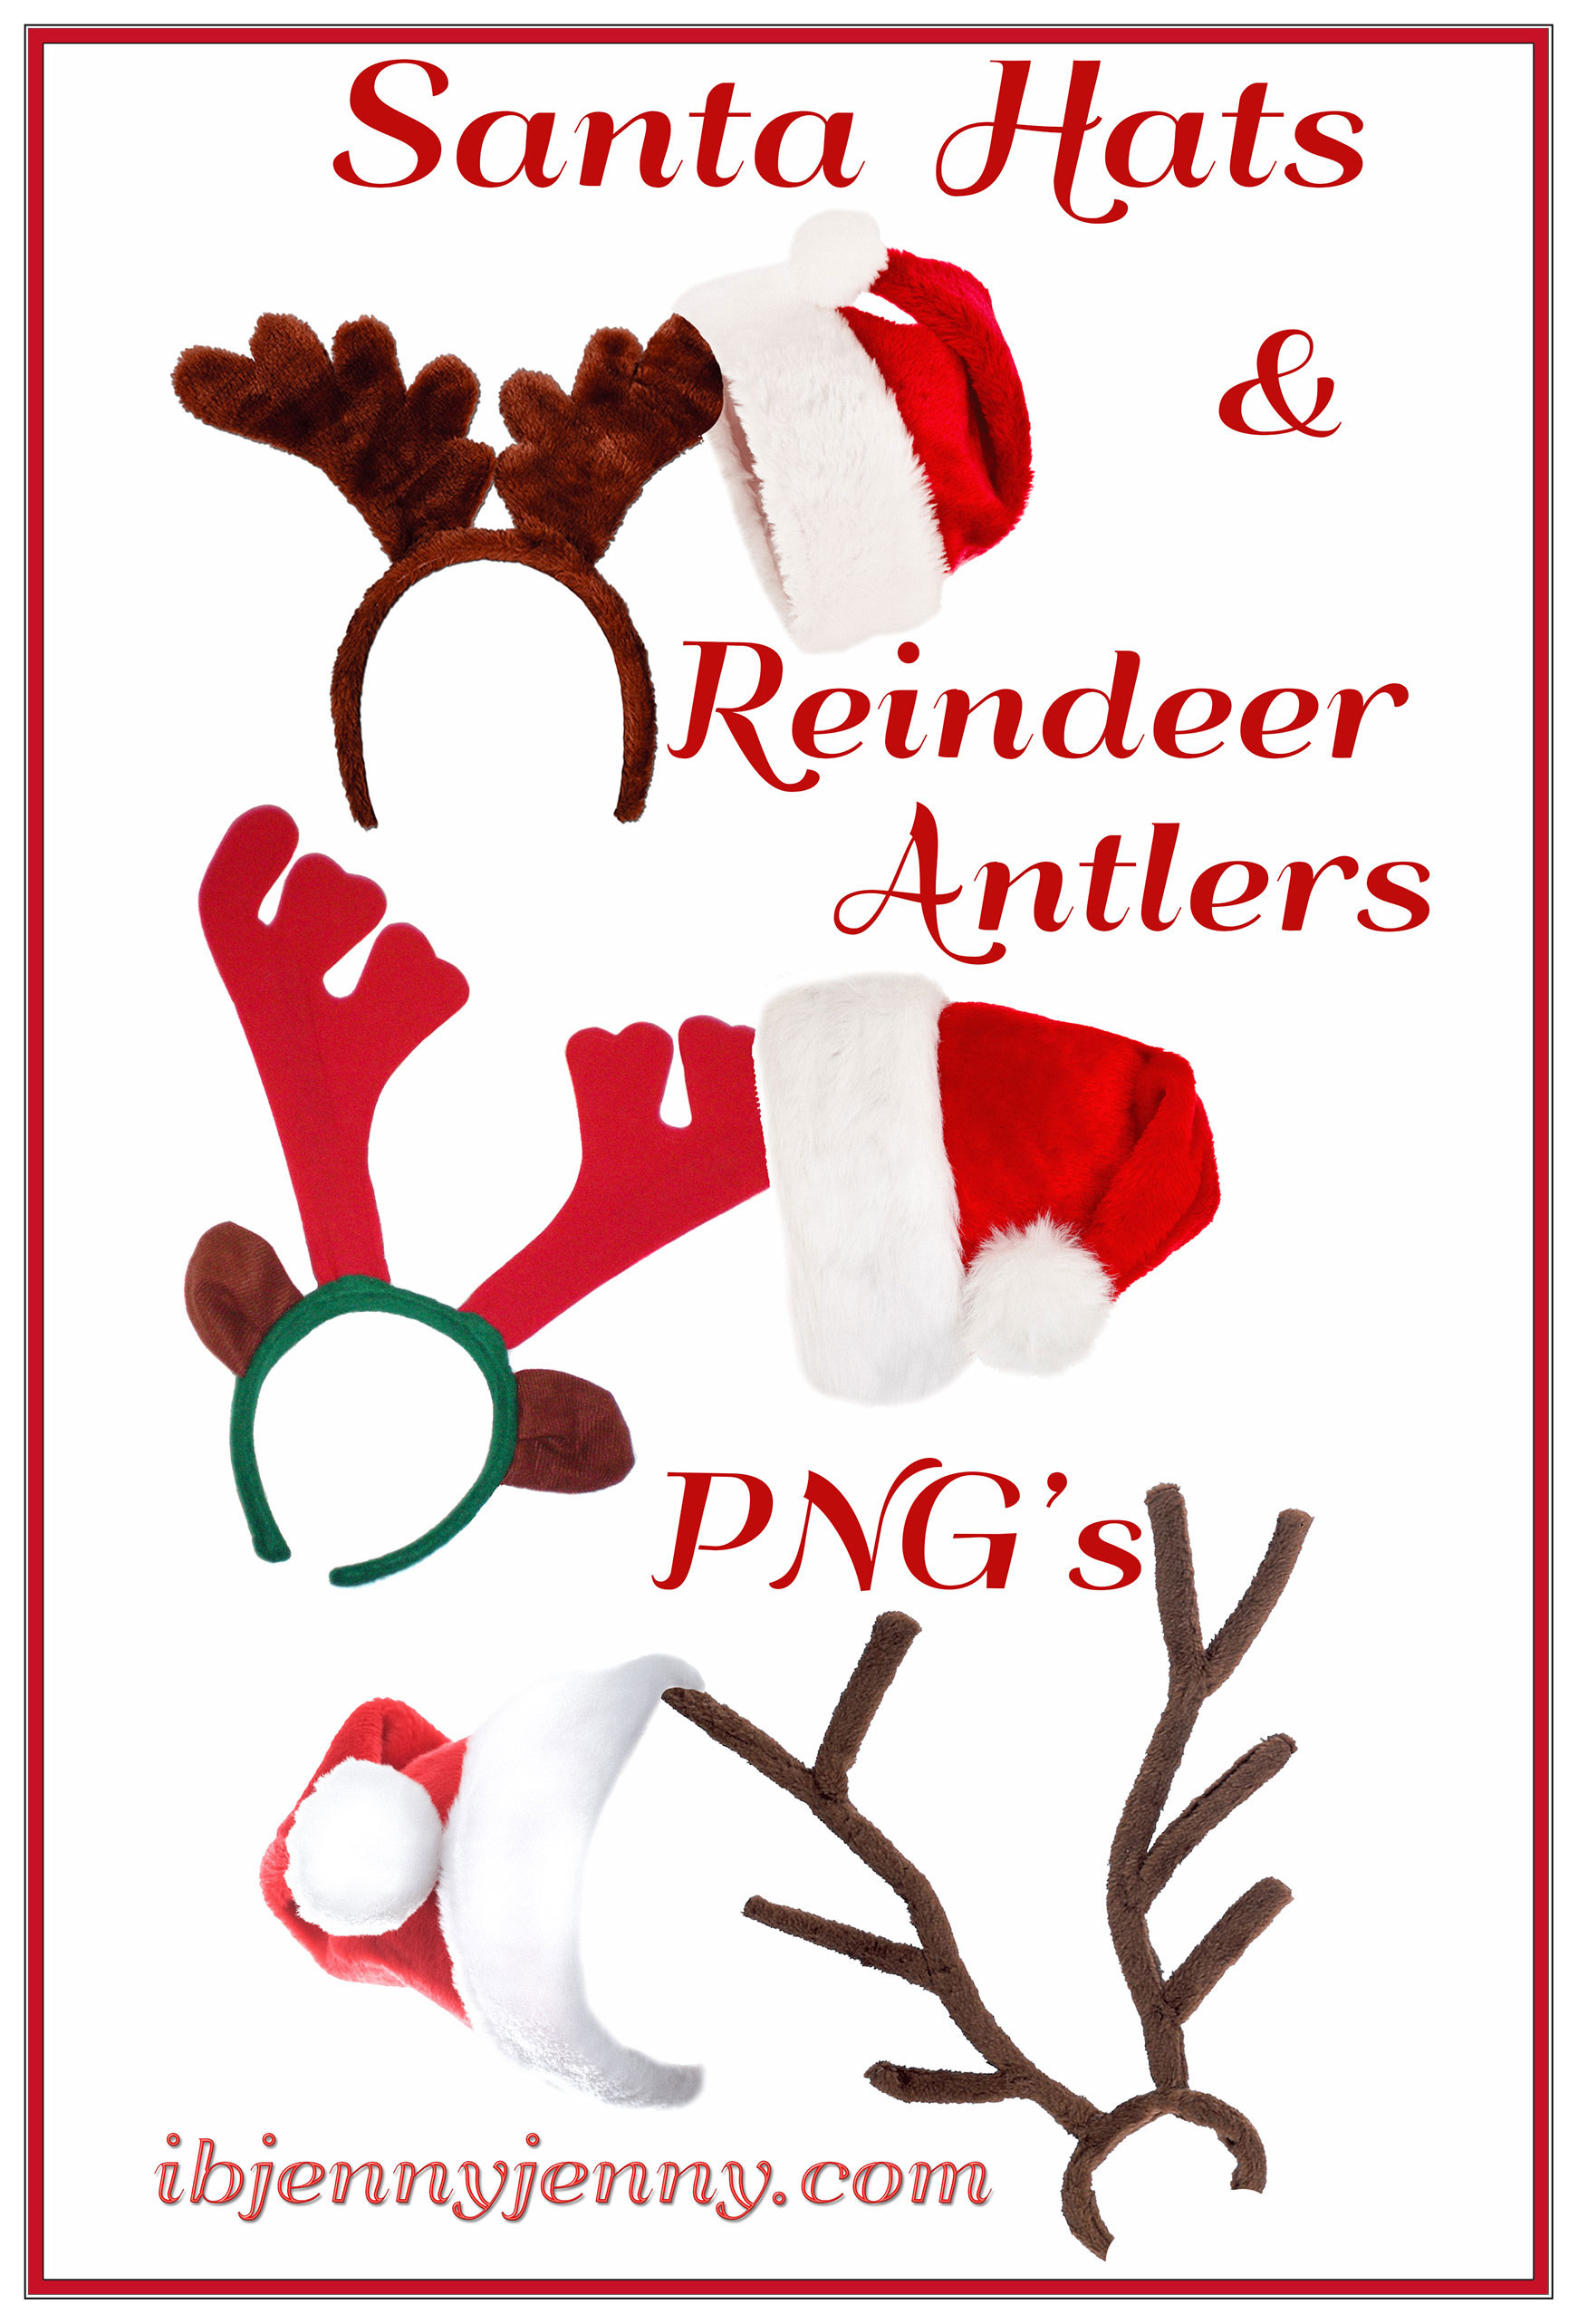 . Hdpng.com Santa Hats And Reindeer Antlers Pngu0027S By Ibjennyjenny - Reindeer Antlers, Transparent background PNG HD thumbnail